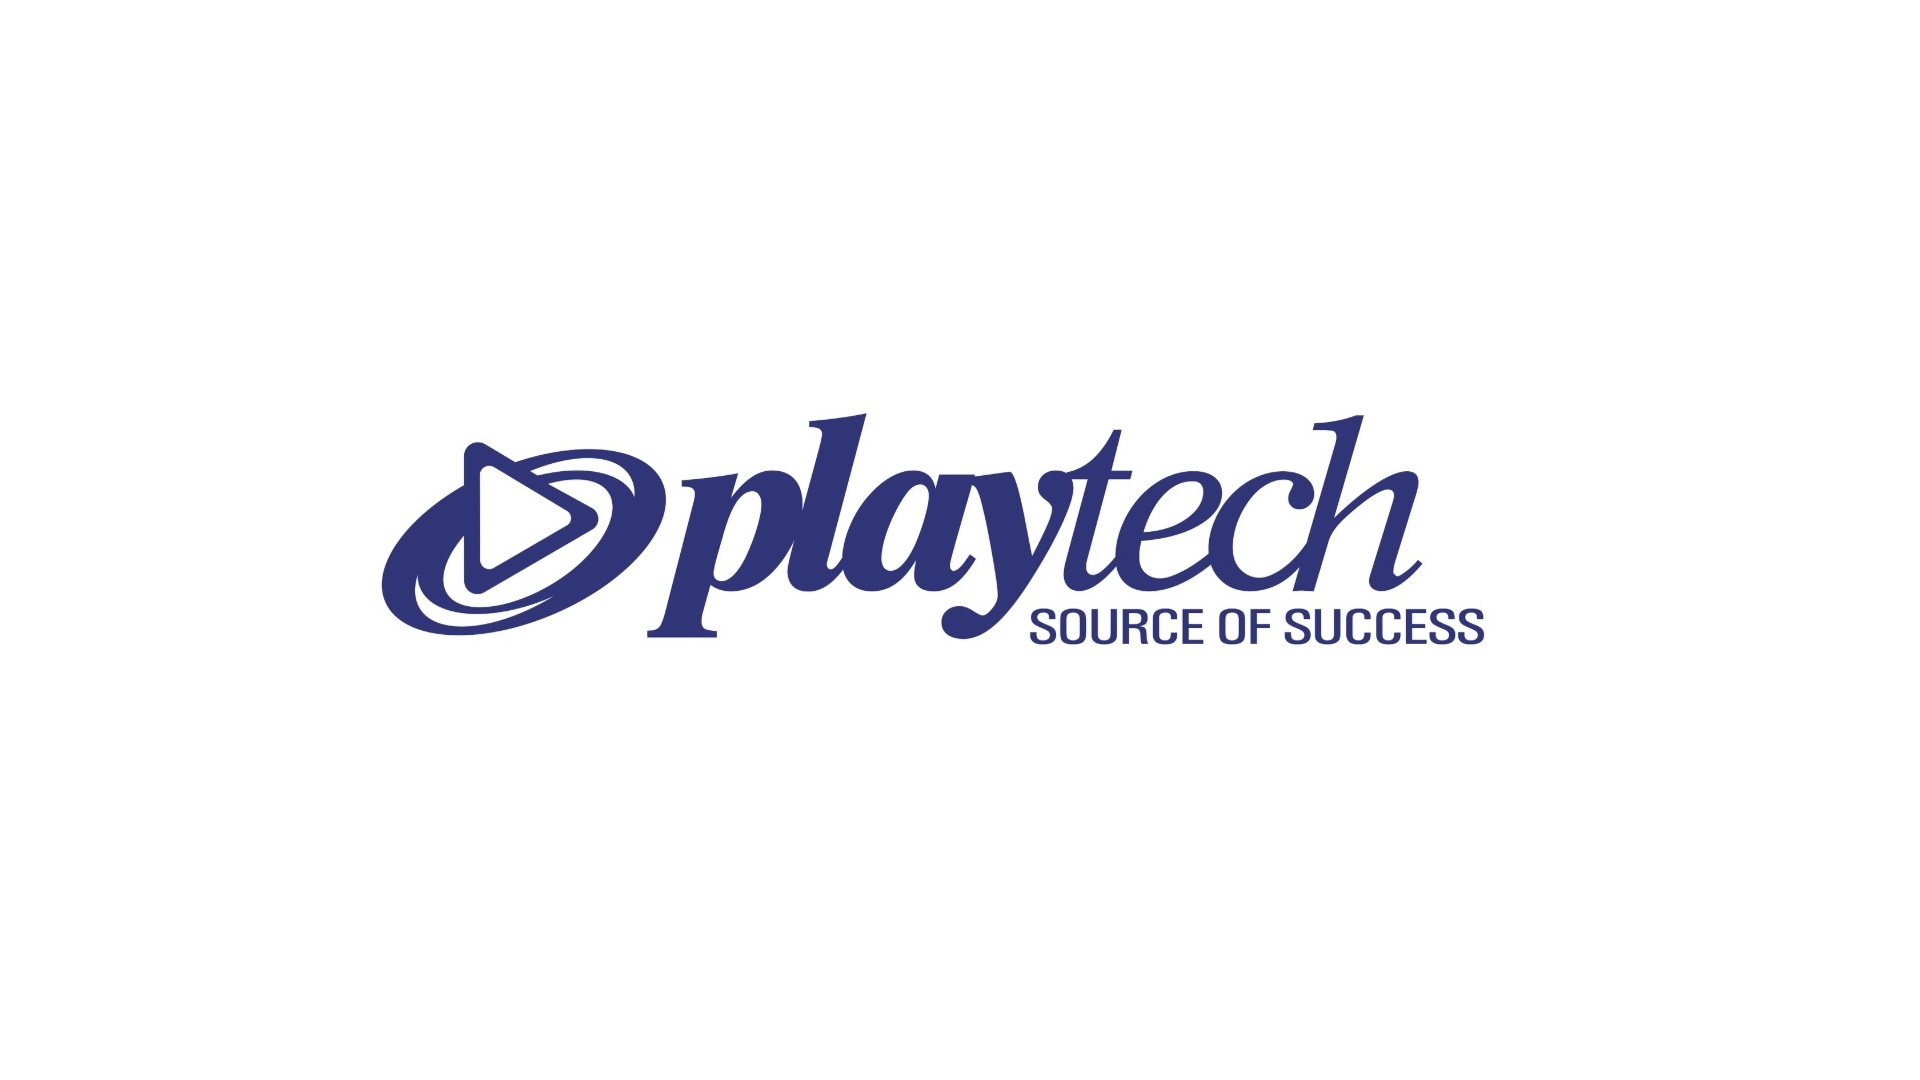 Playtech signs new partnership agreement with DAZN Bet